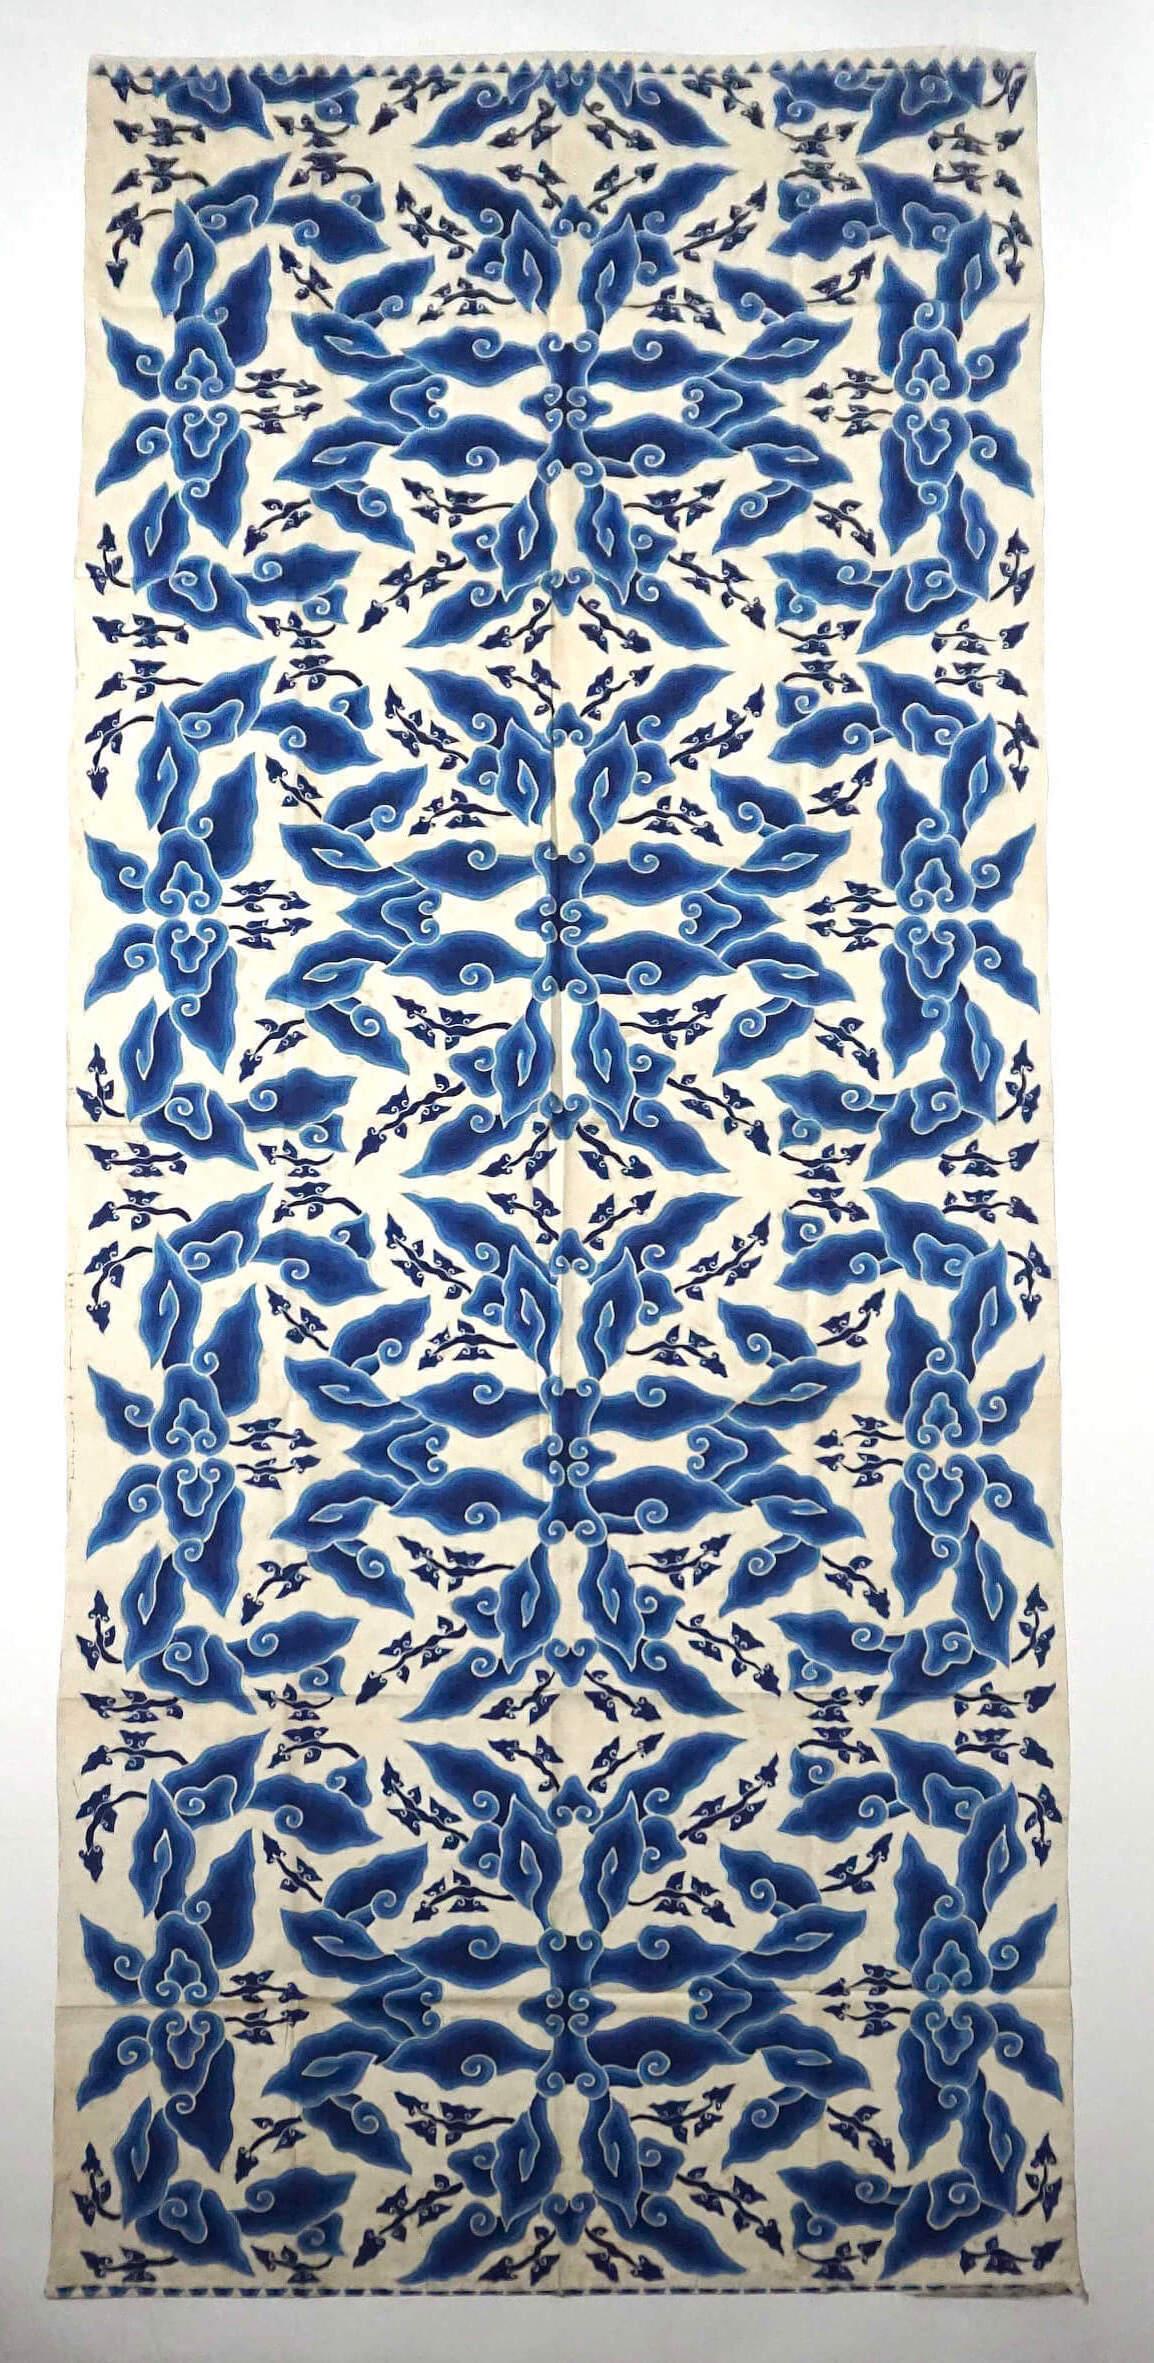 A fine and large semi-antique circa 1930 Indonesian batik finely-woven cotton panel from Cirebon, West Java having blue and white 